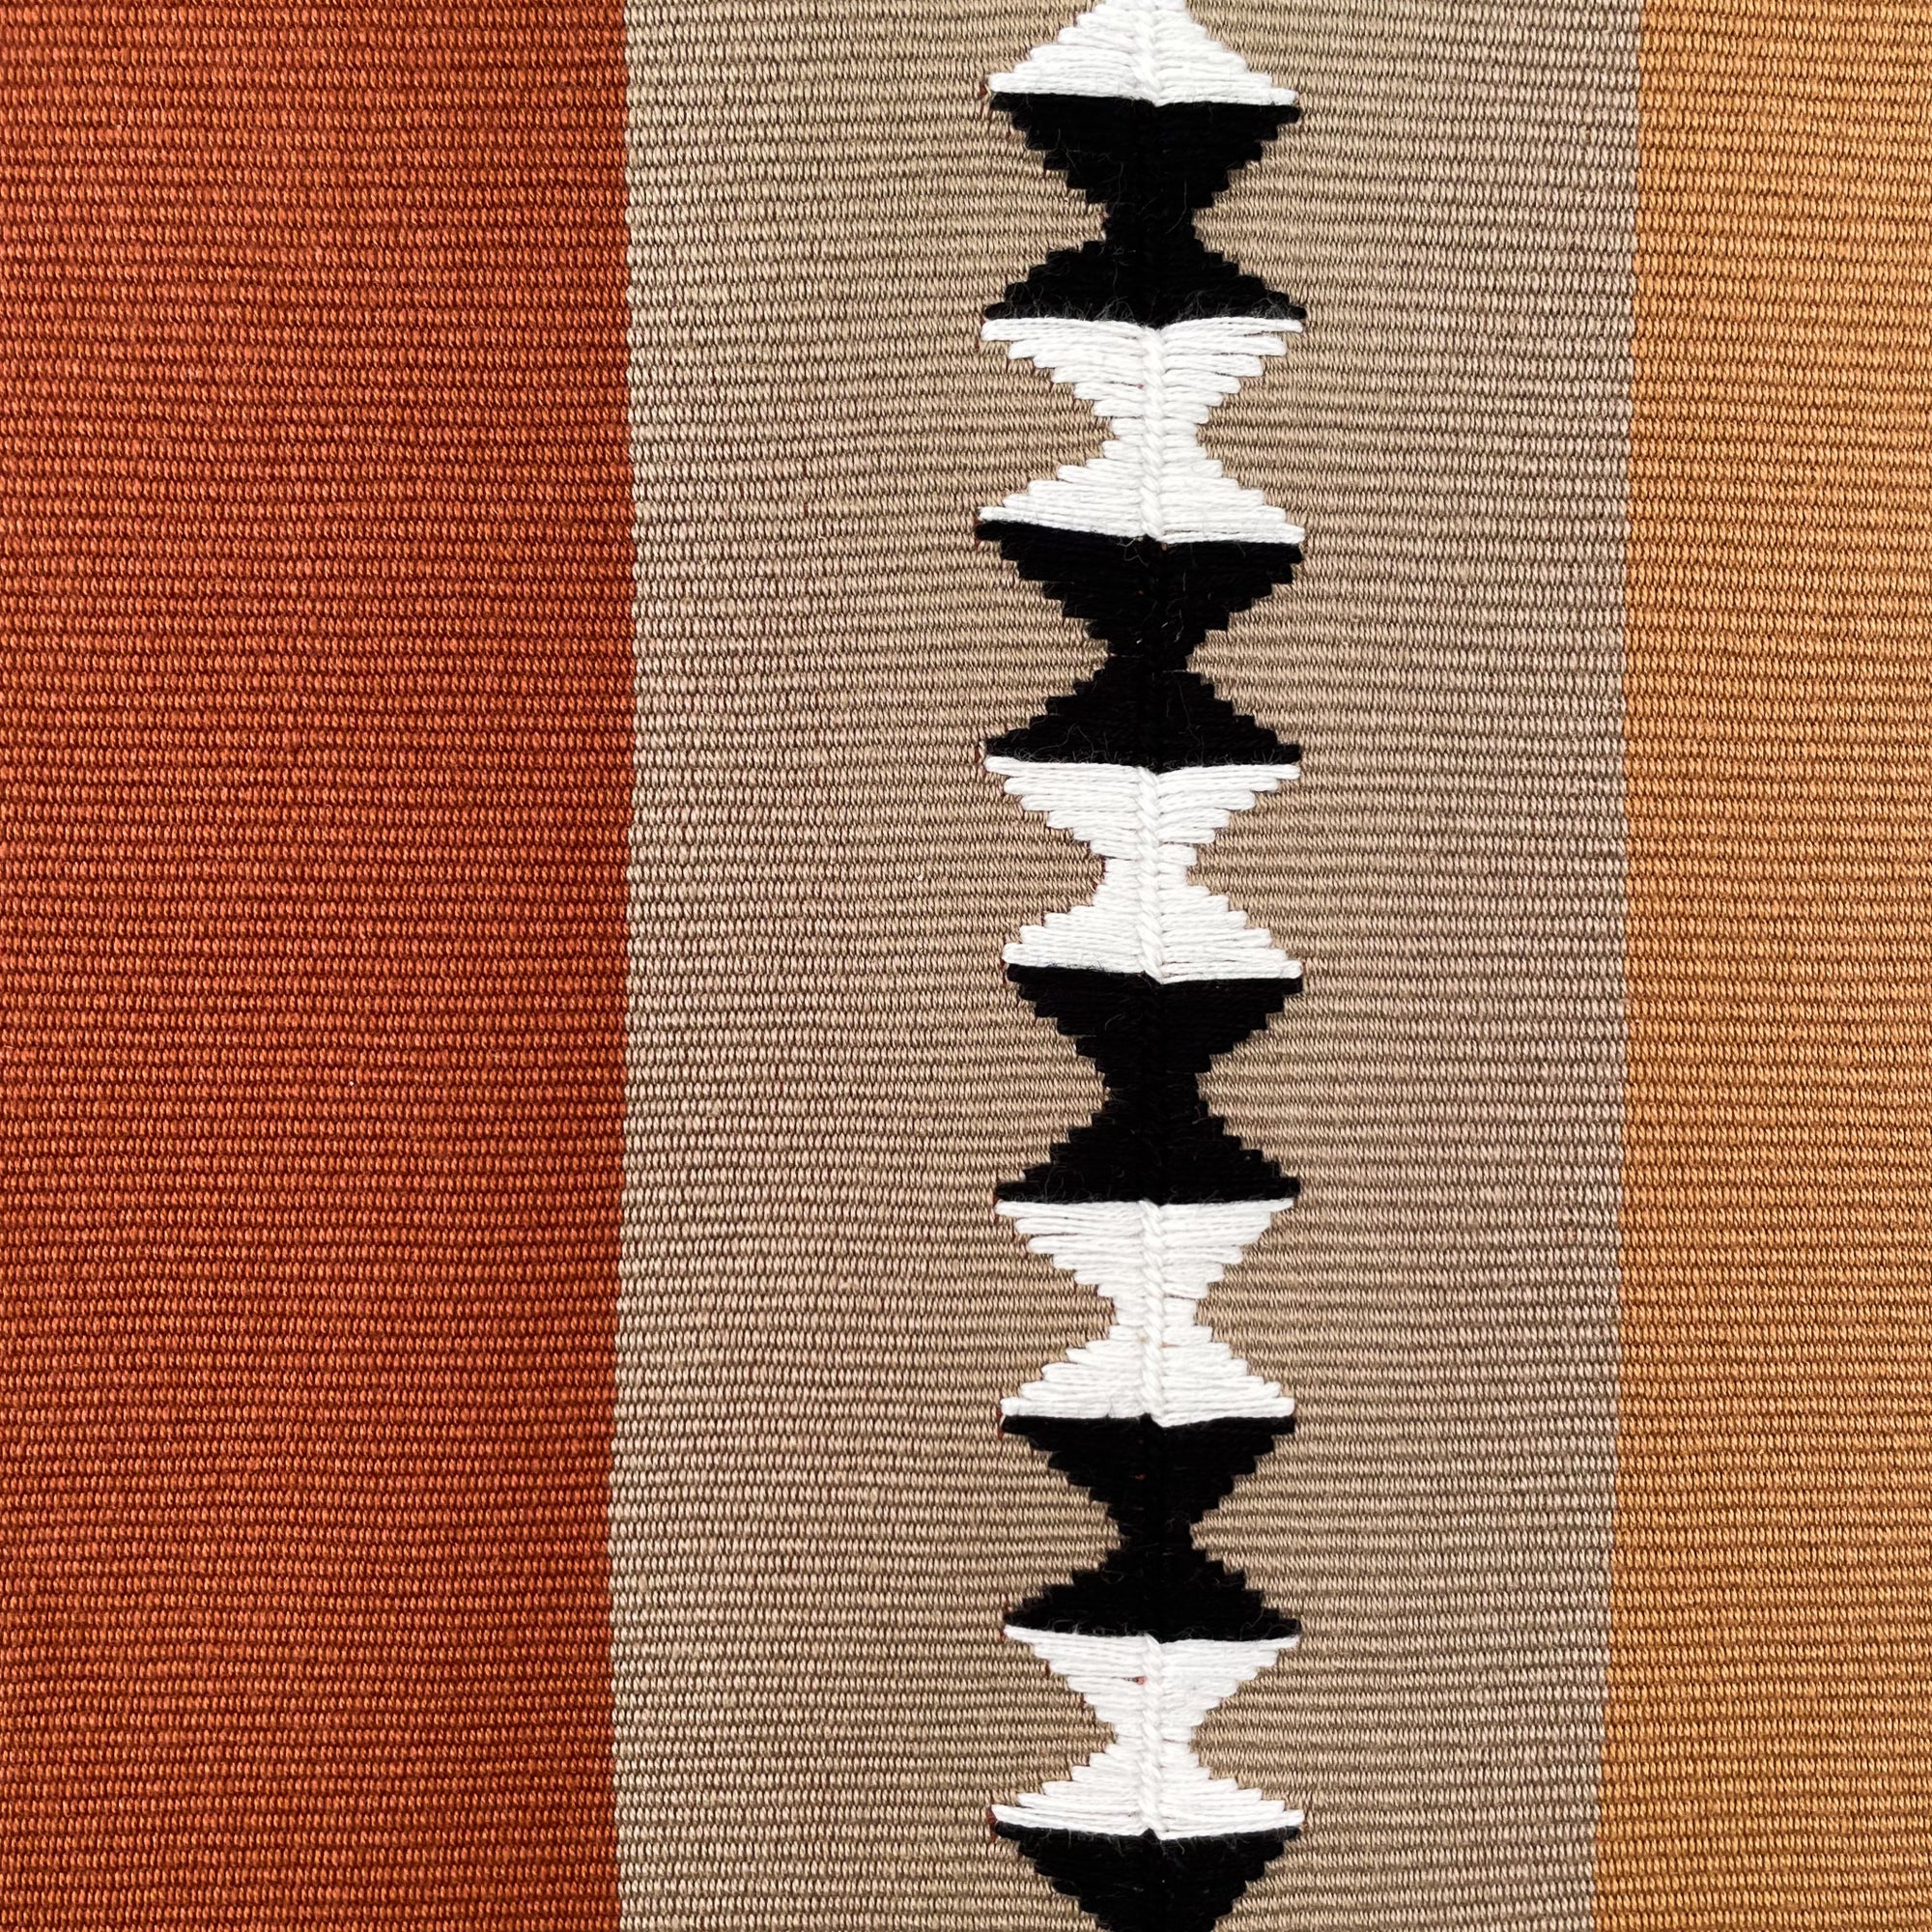 Front of rectangular cushion with color block panels in different shades of brown, with black and white randa detail on center panel, with colorful cinta tag